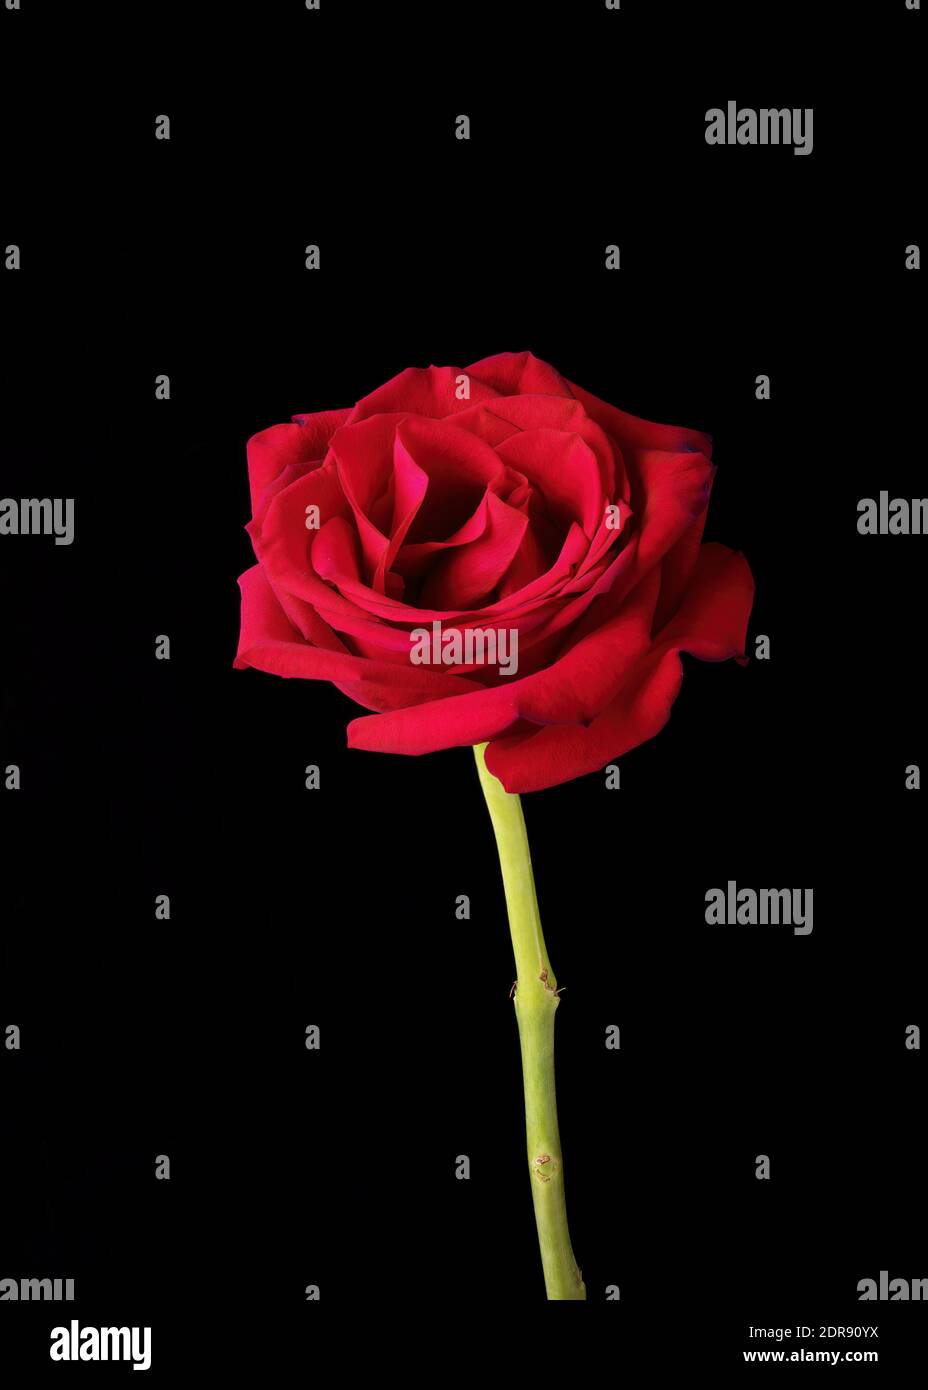 A single American Beauty rose blossom pictured against a black background. Stock Photo